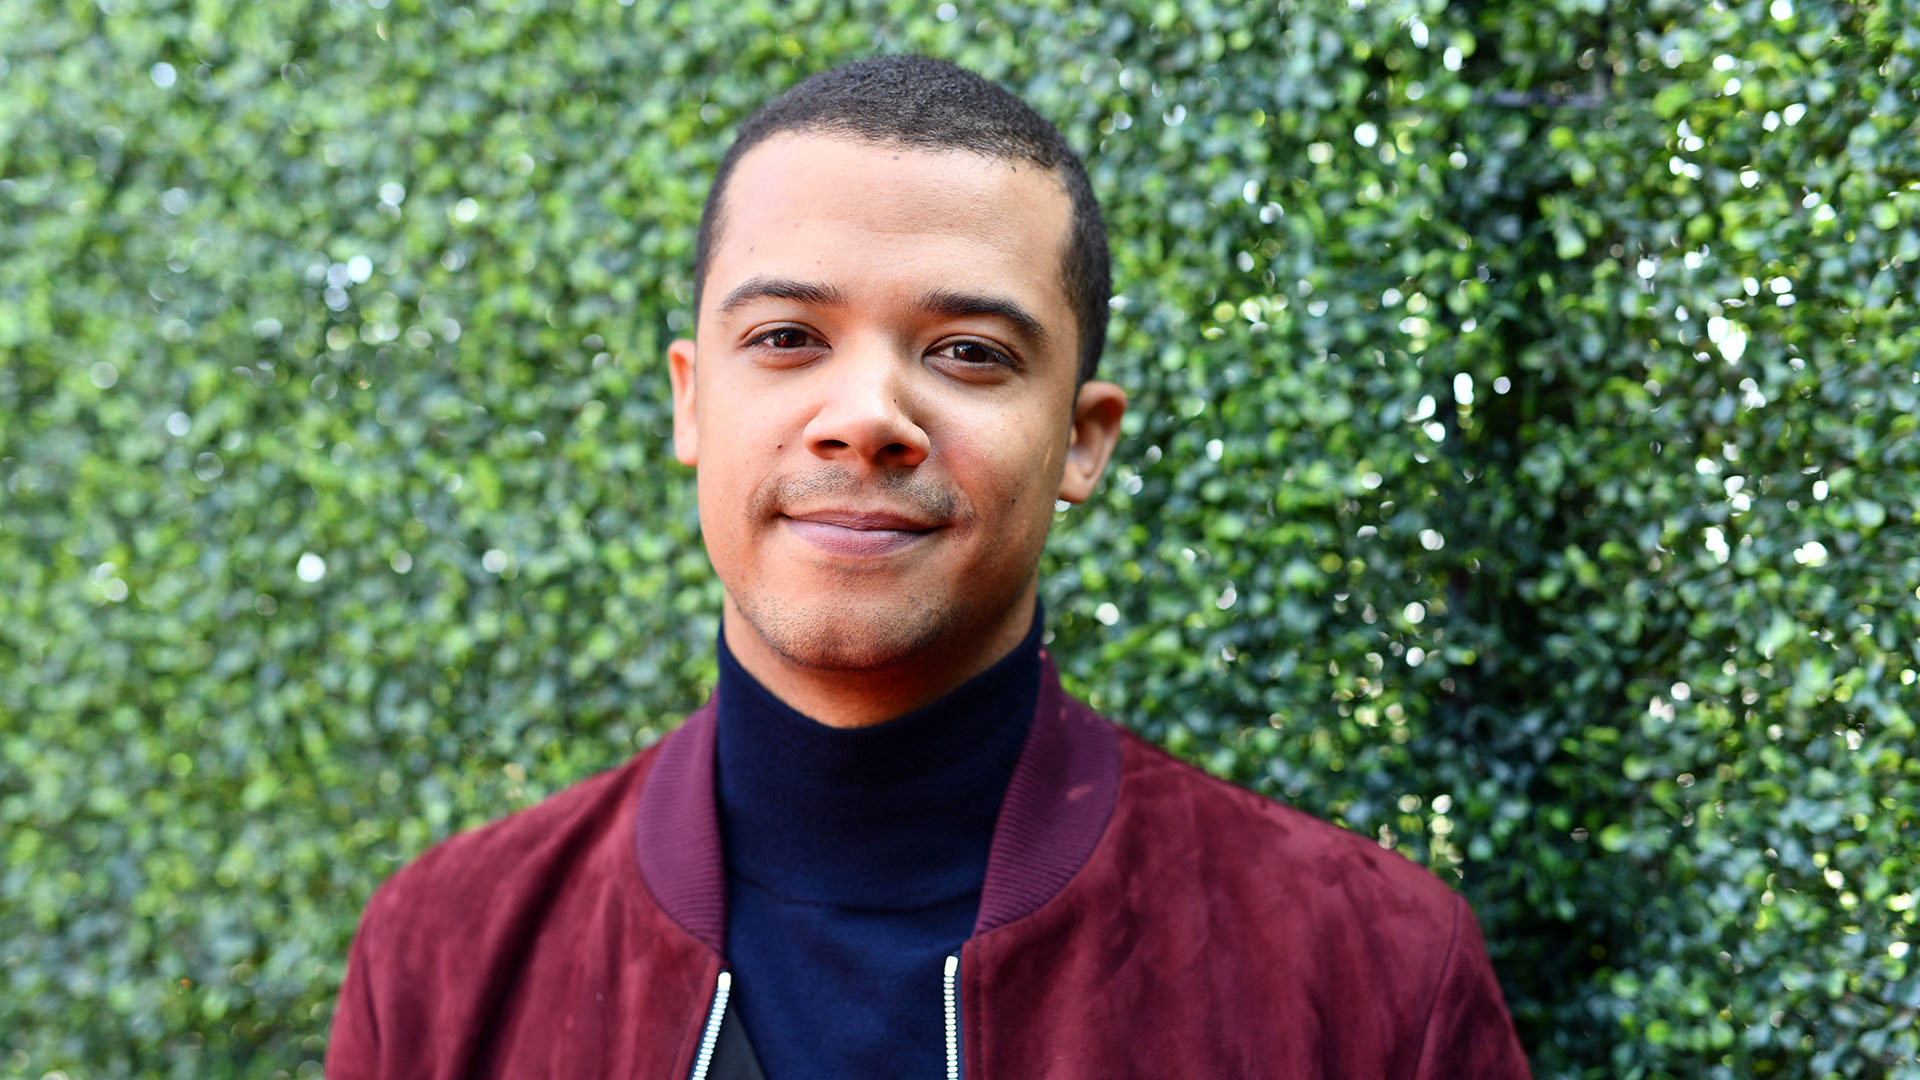 Where to Look for Jacob Anderson: From 'Doctors' to the Next Season of 'Doctor Who'